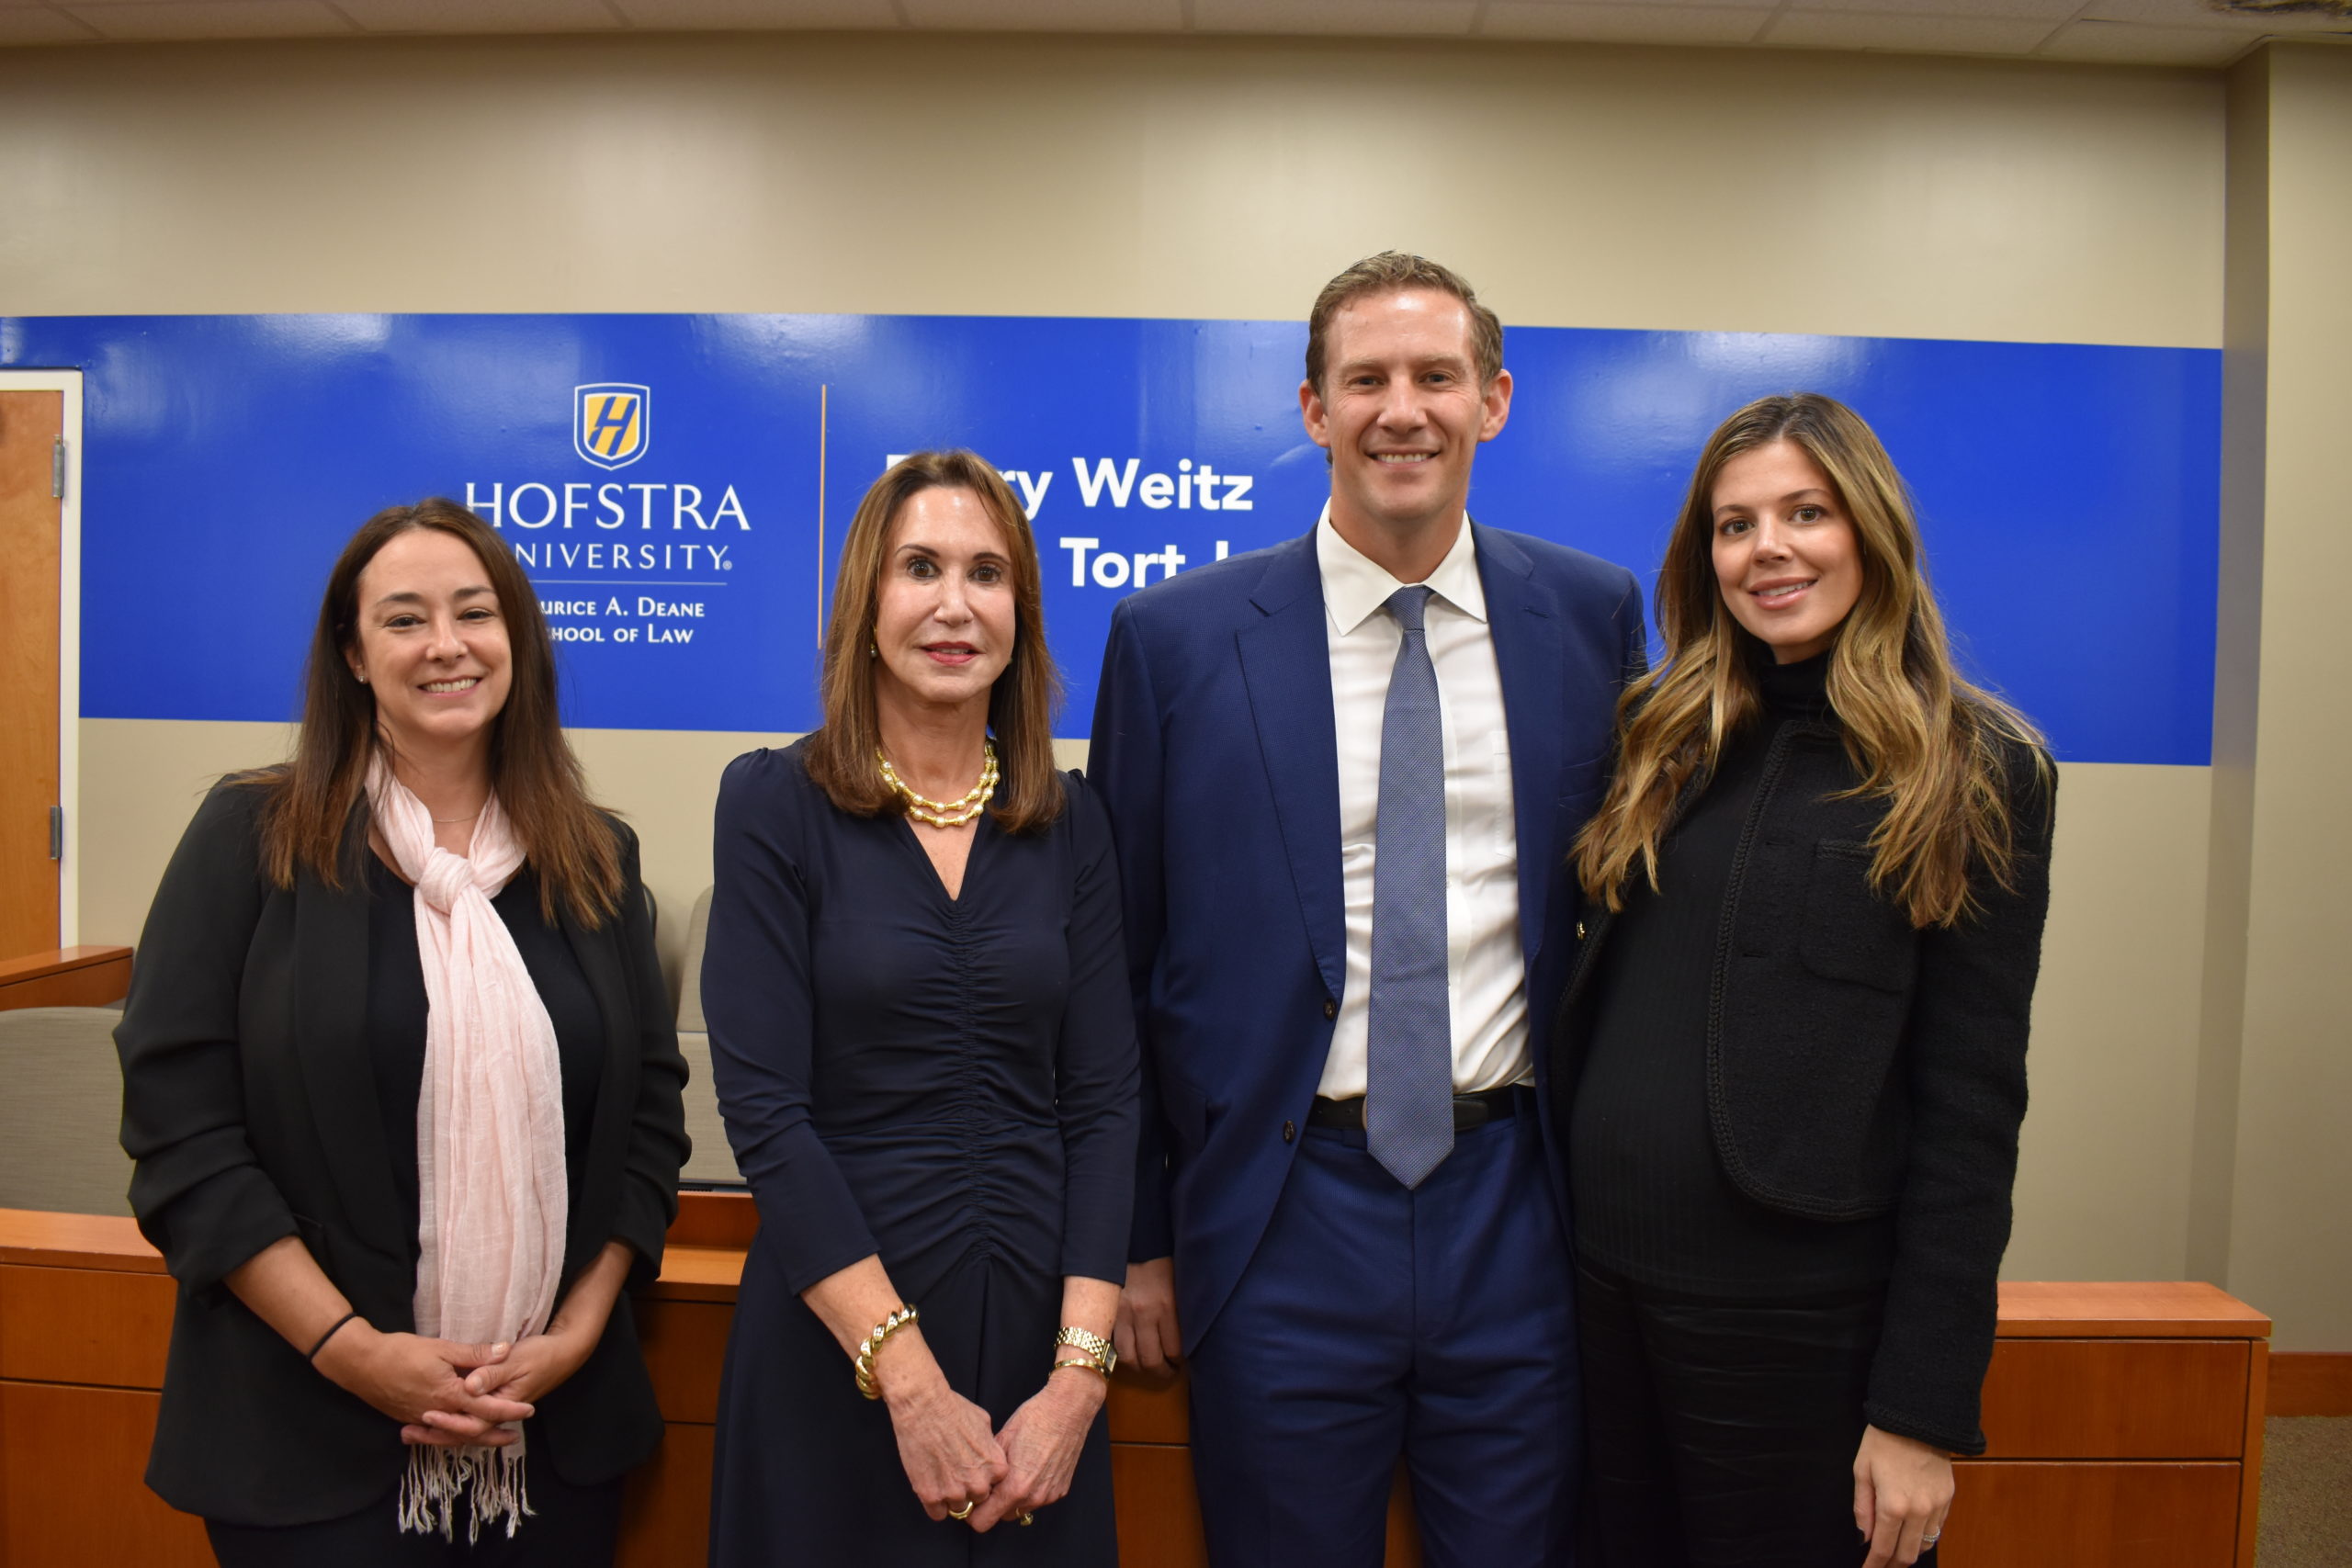 Hofstra Law launches Perry Weitz Mass Tort Institute